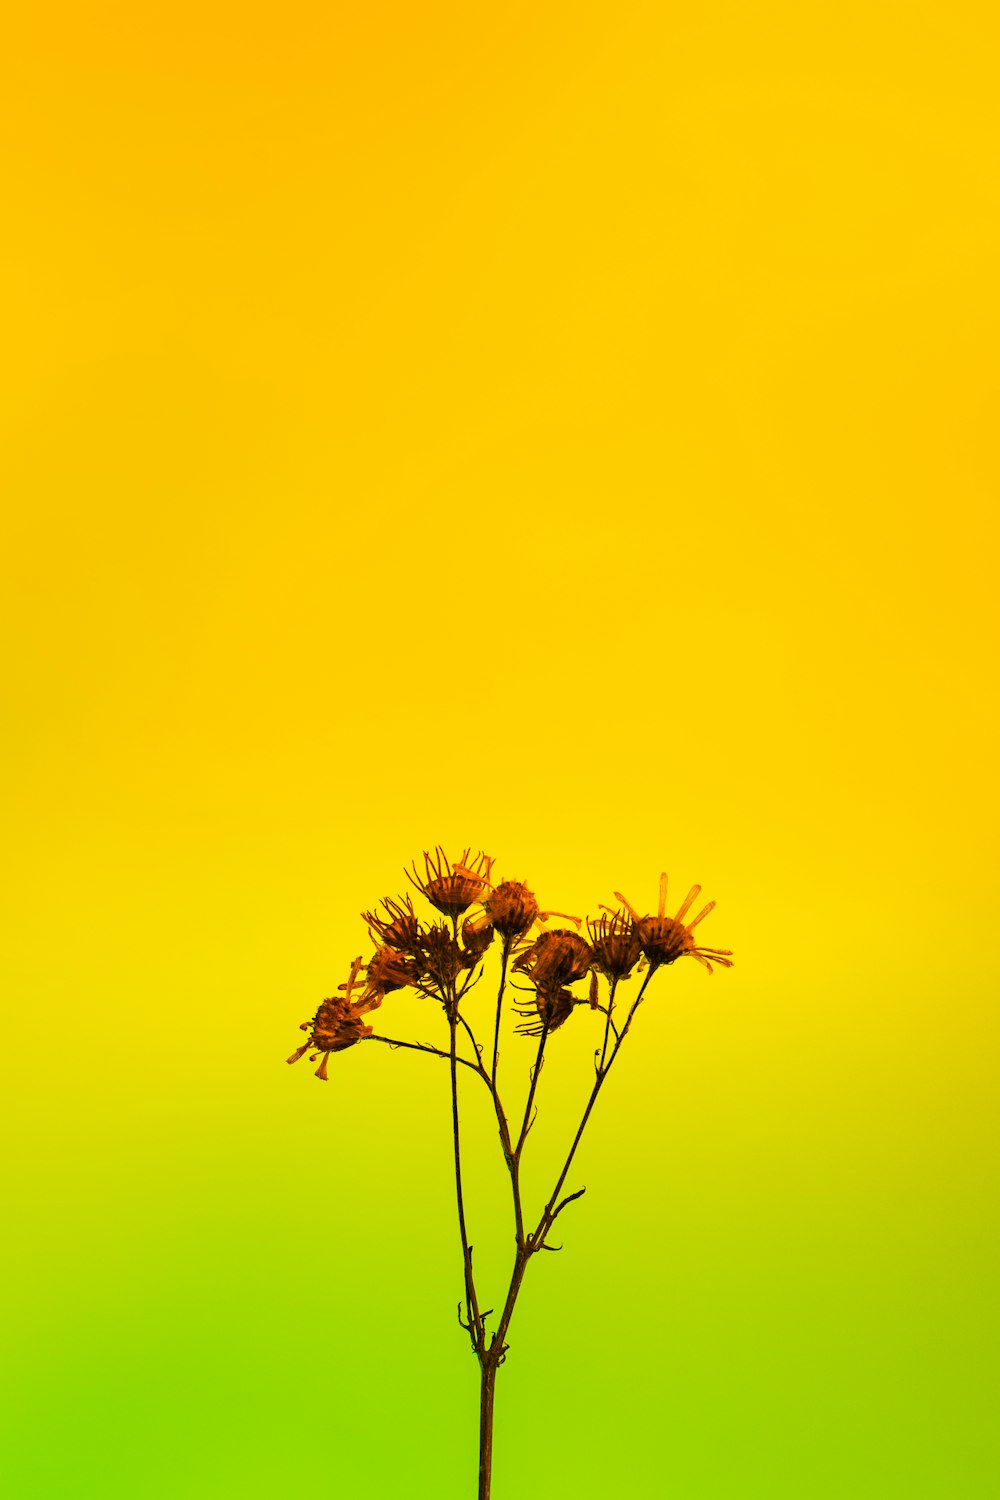 a yellow and green background with a plant in the foreground